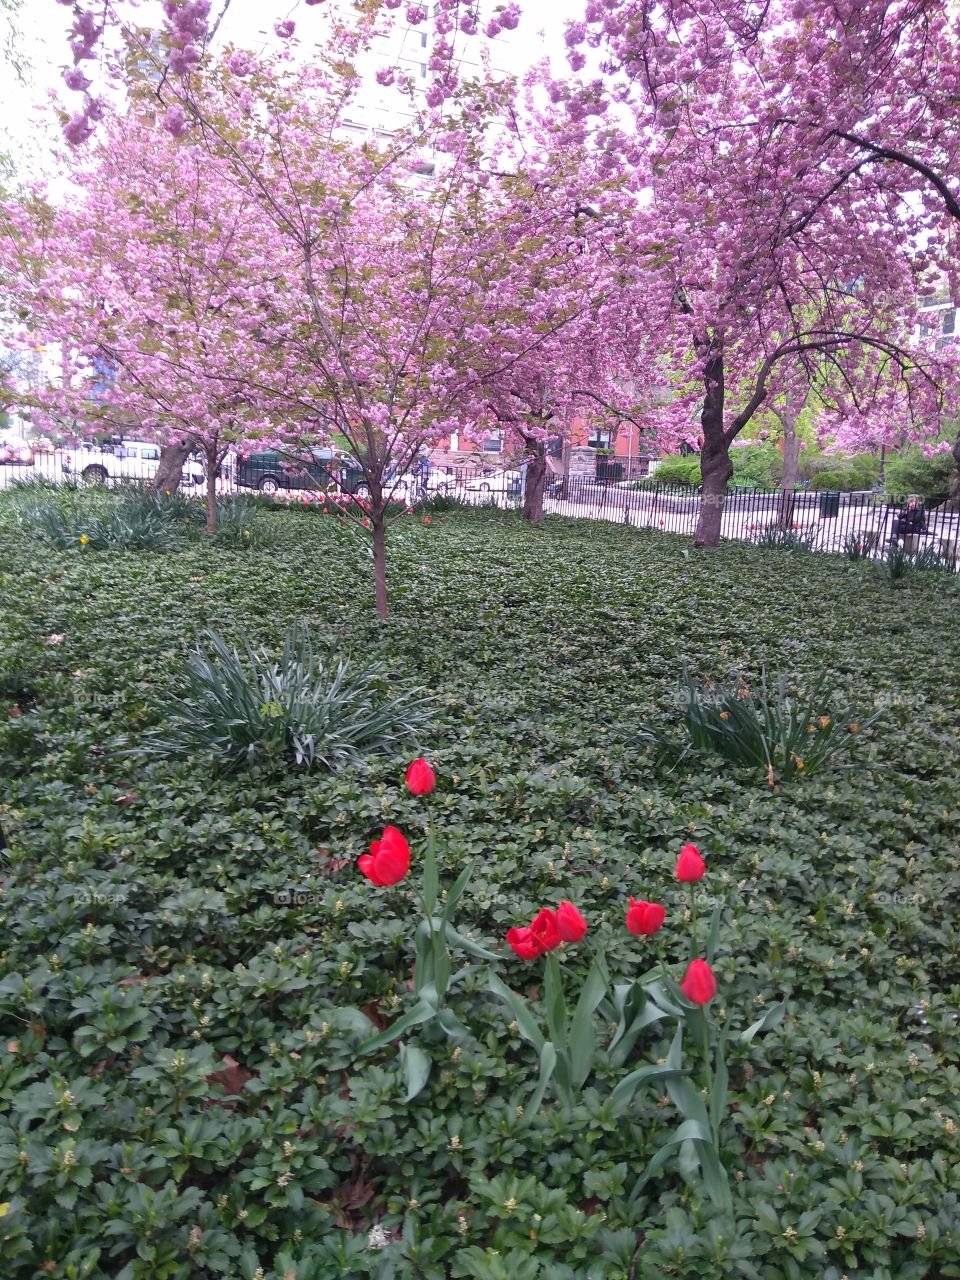 Flowering Trees and Tulips